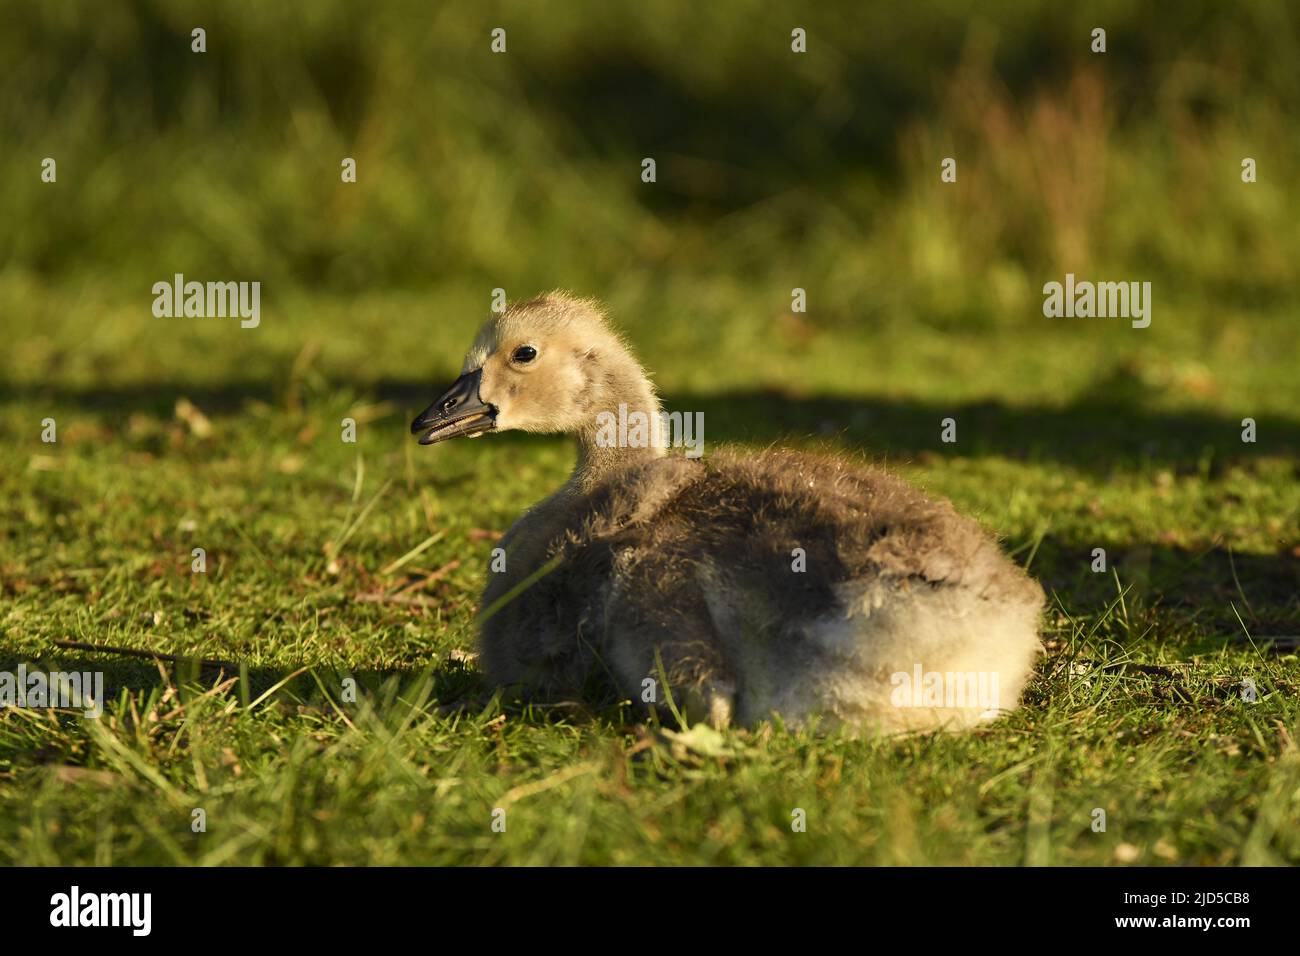 Canada goose (Branta canadensis) gosling resting on the grass in Richmond Park Surrey England UK. Stock Photo